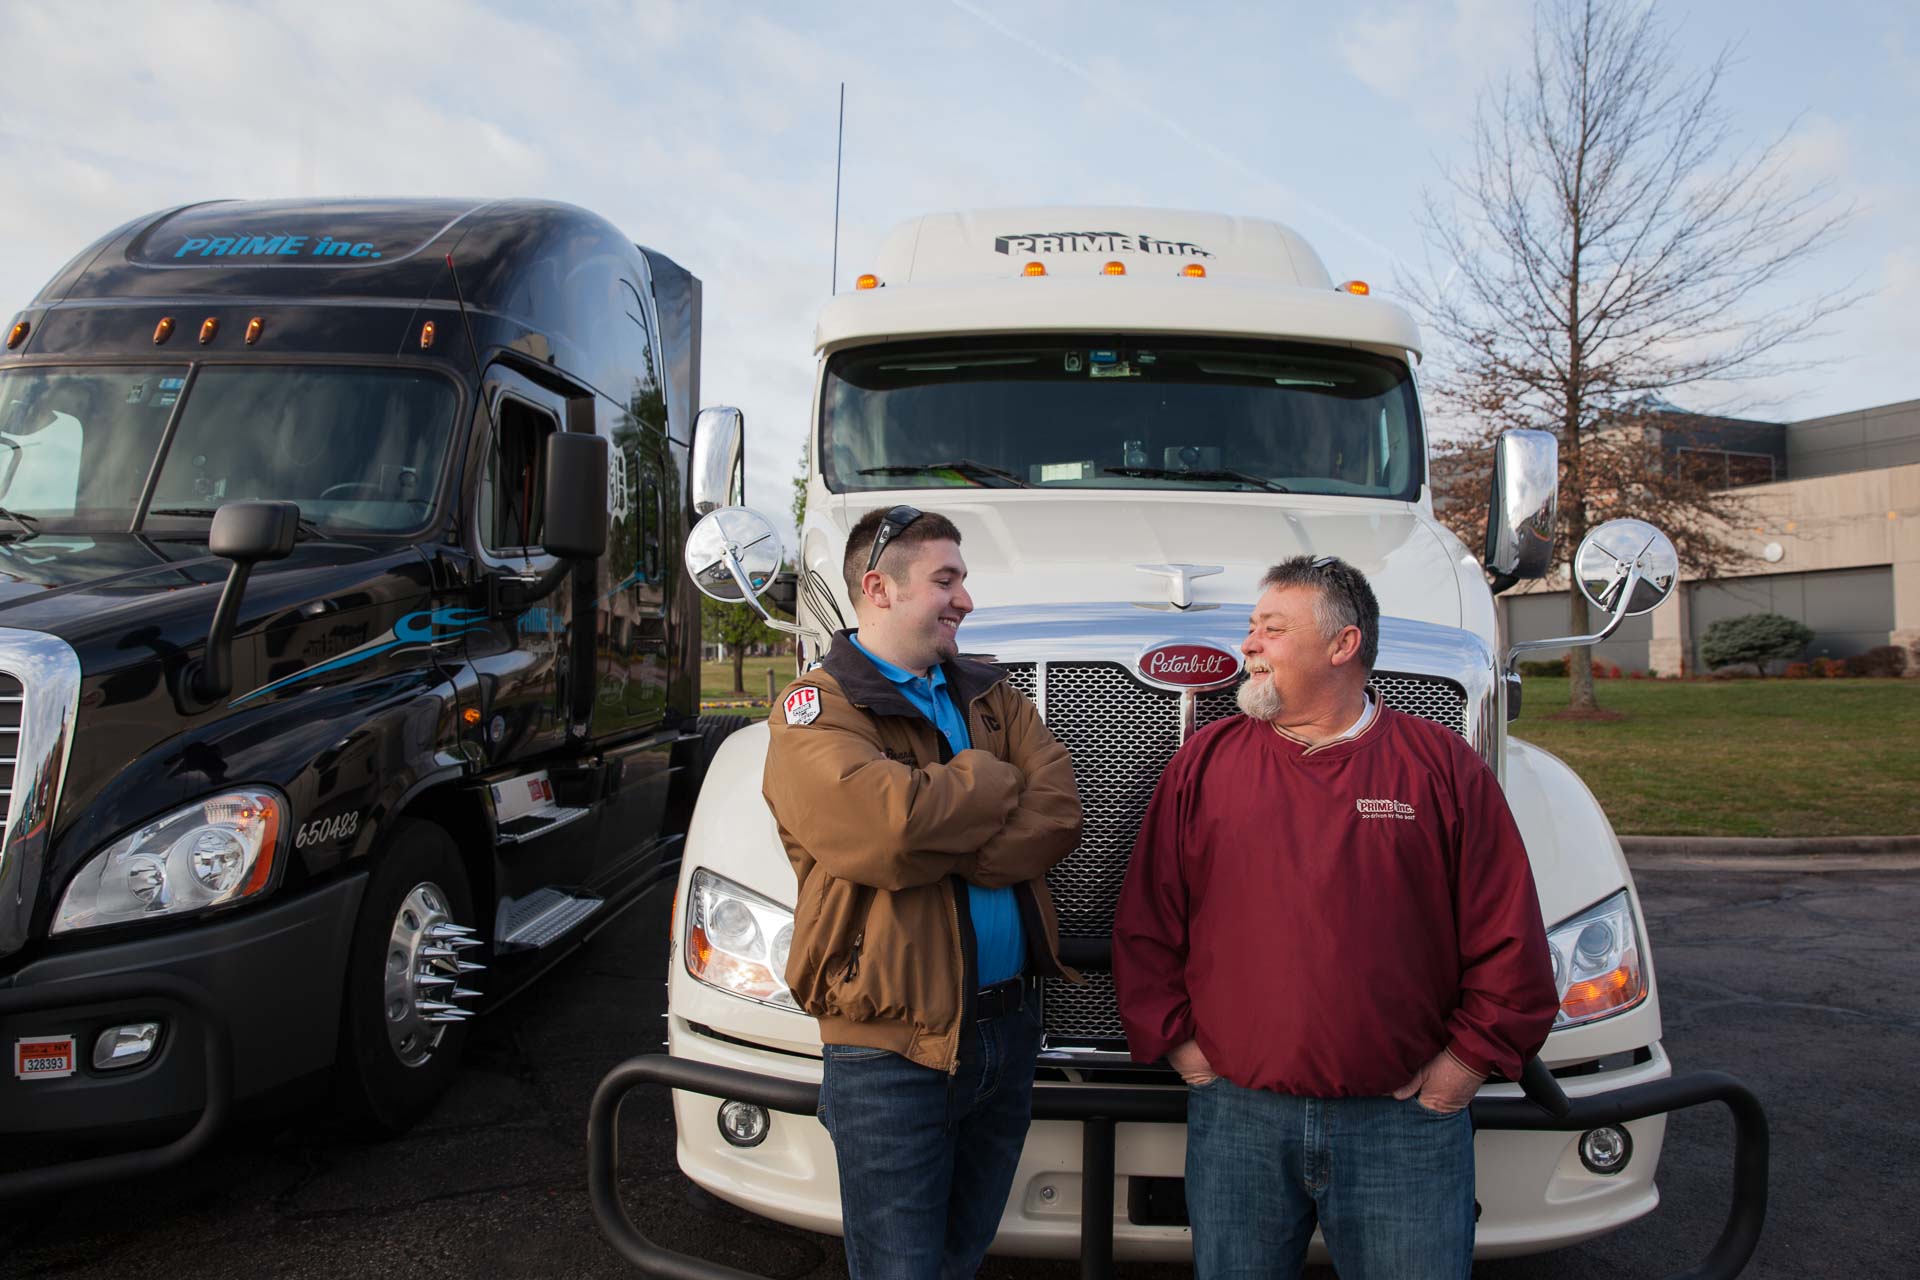 A team of Prime truck drivers talking in front of their newly leased semi-truck.